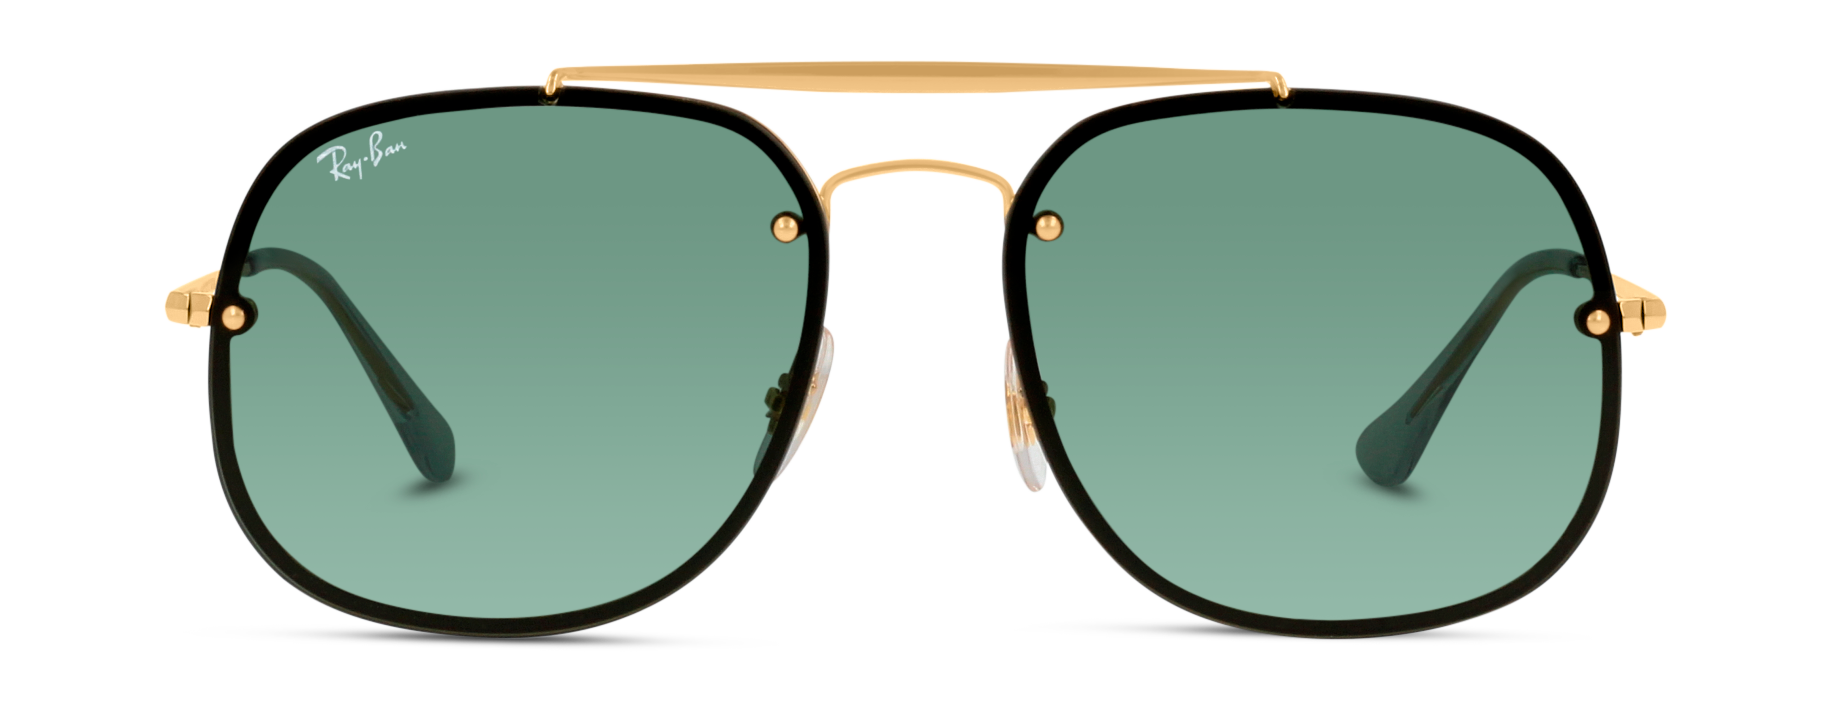 [products.image.front] Ray-Ban Blaze General RB3583N 905071